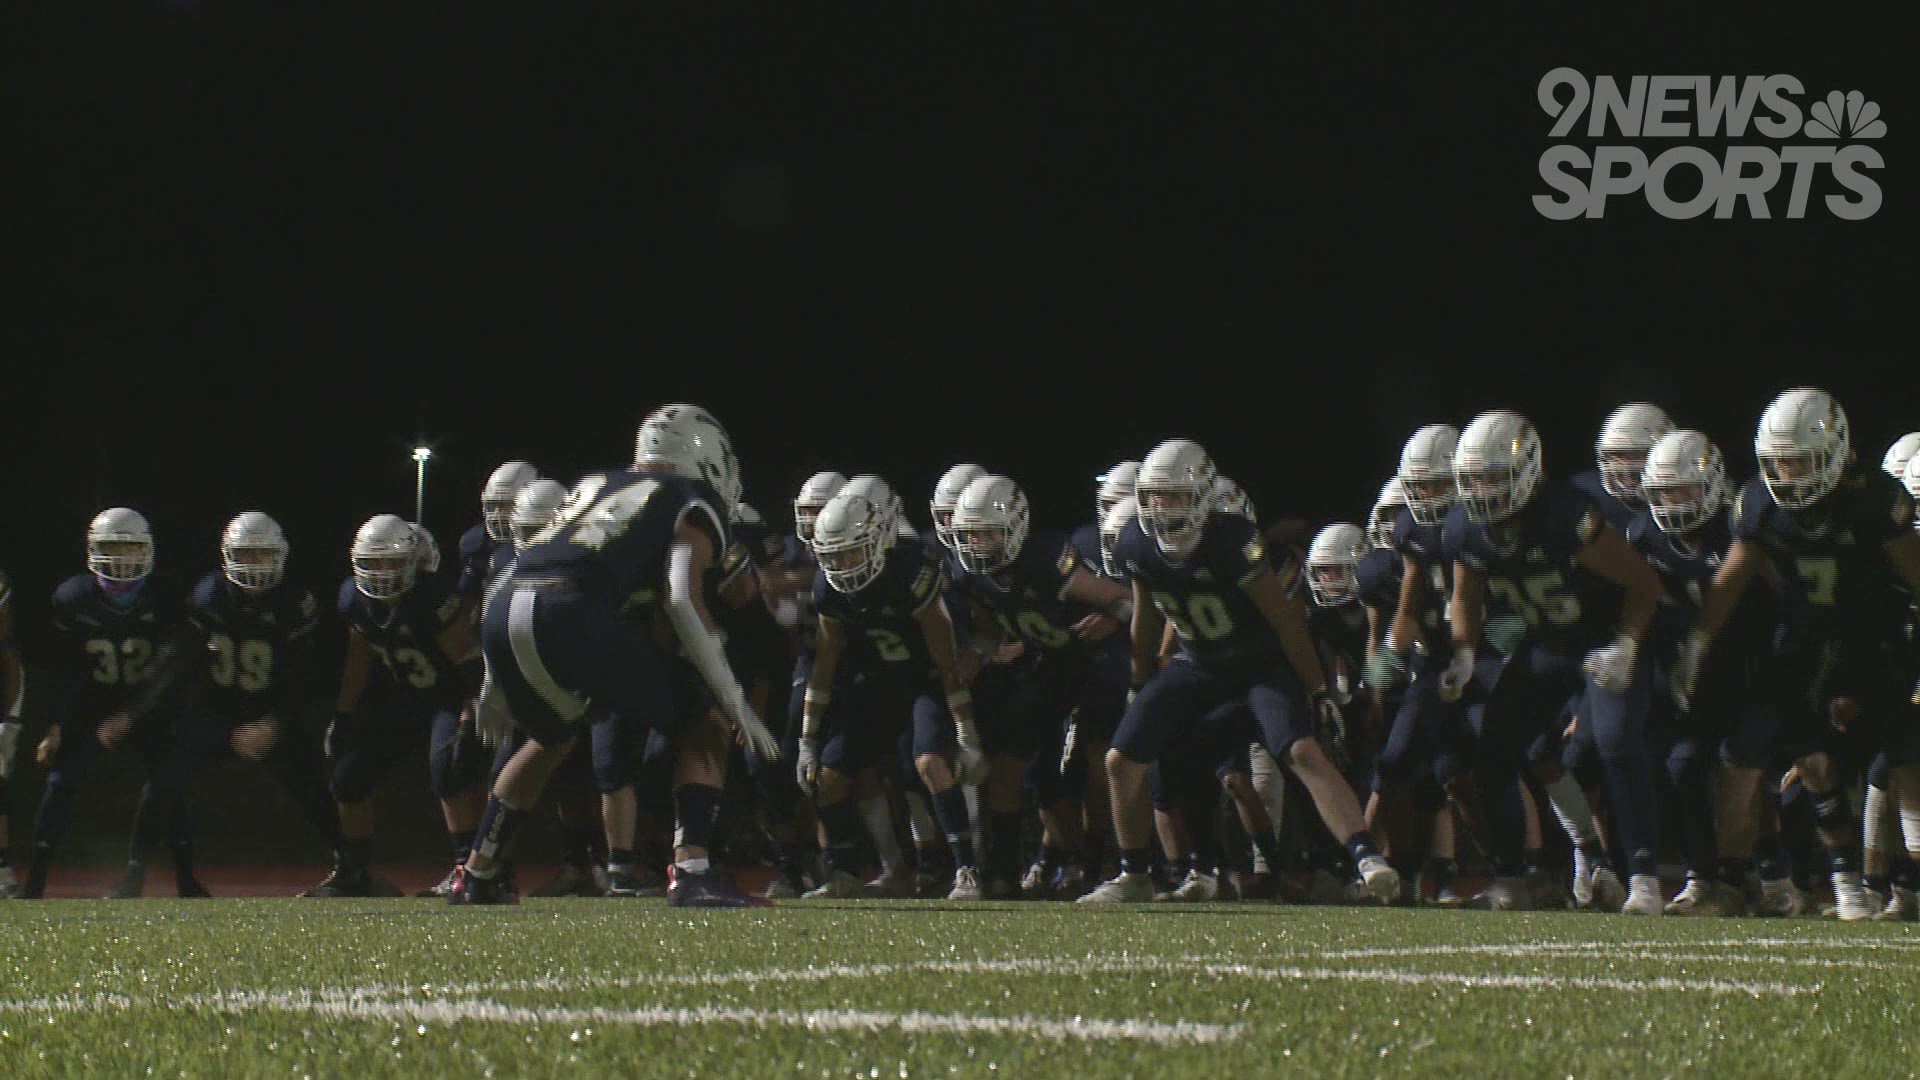 The Mustangs used their final game of the year to knock off Legacy by a score of 41-21.